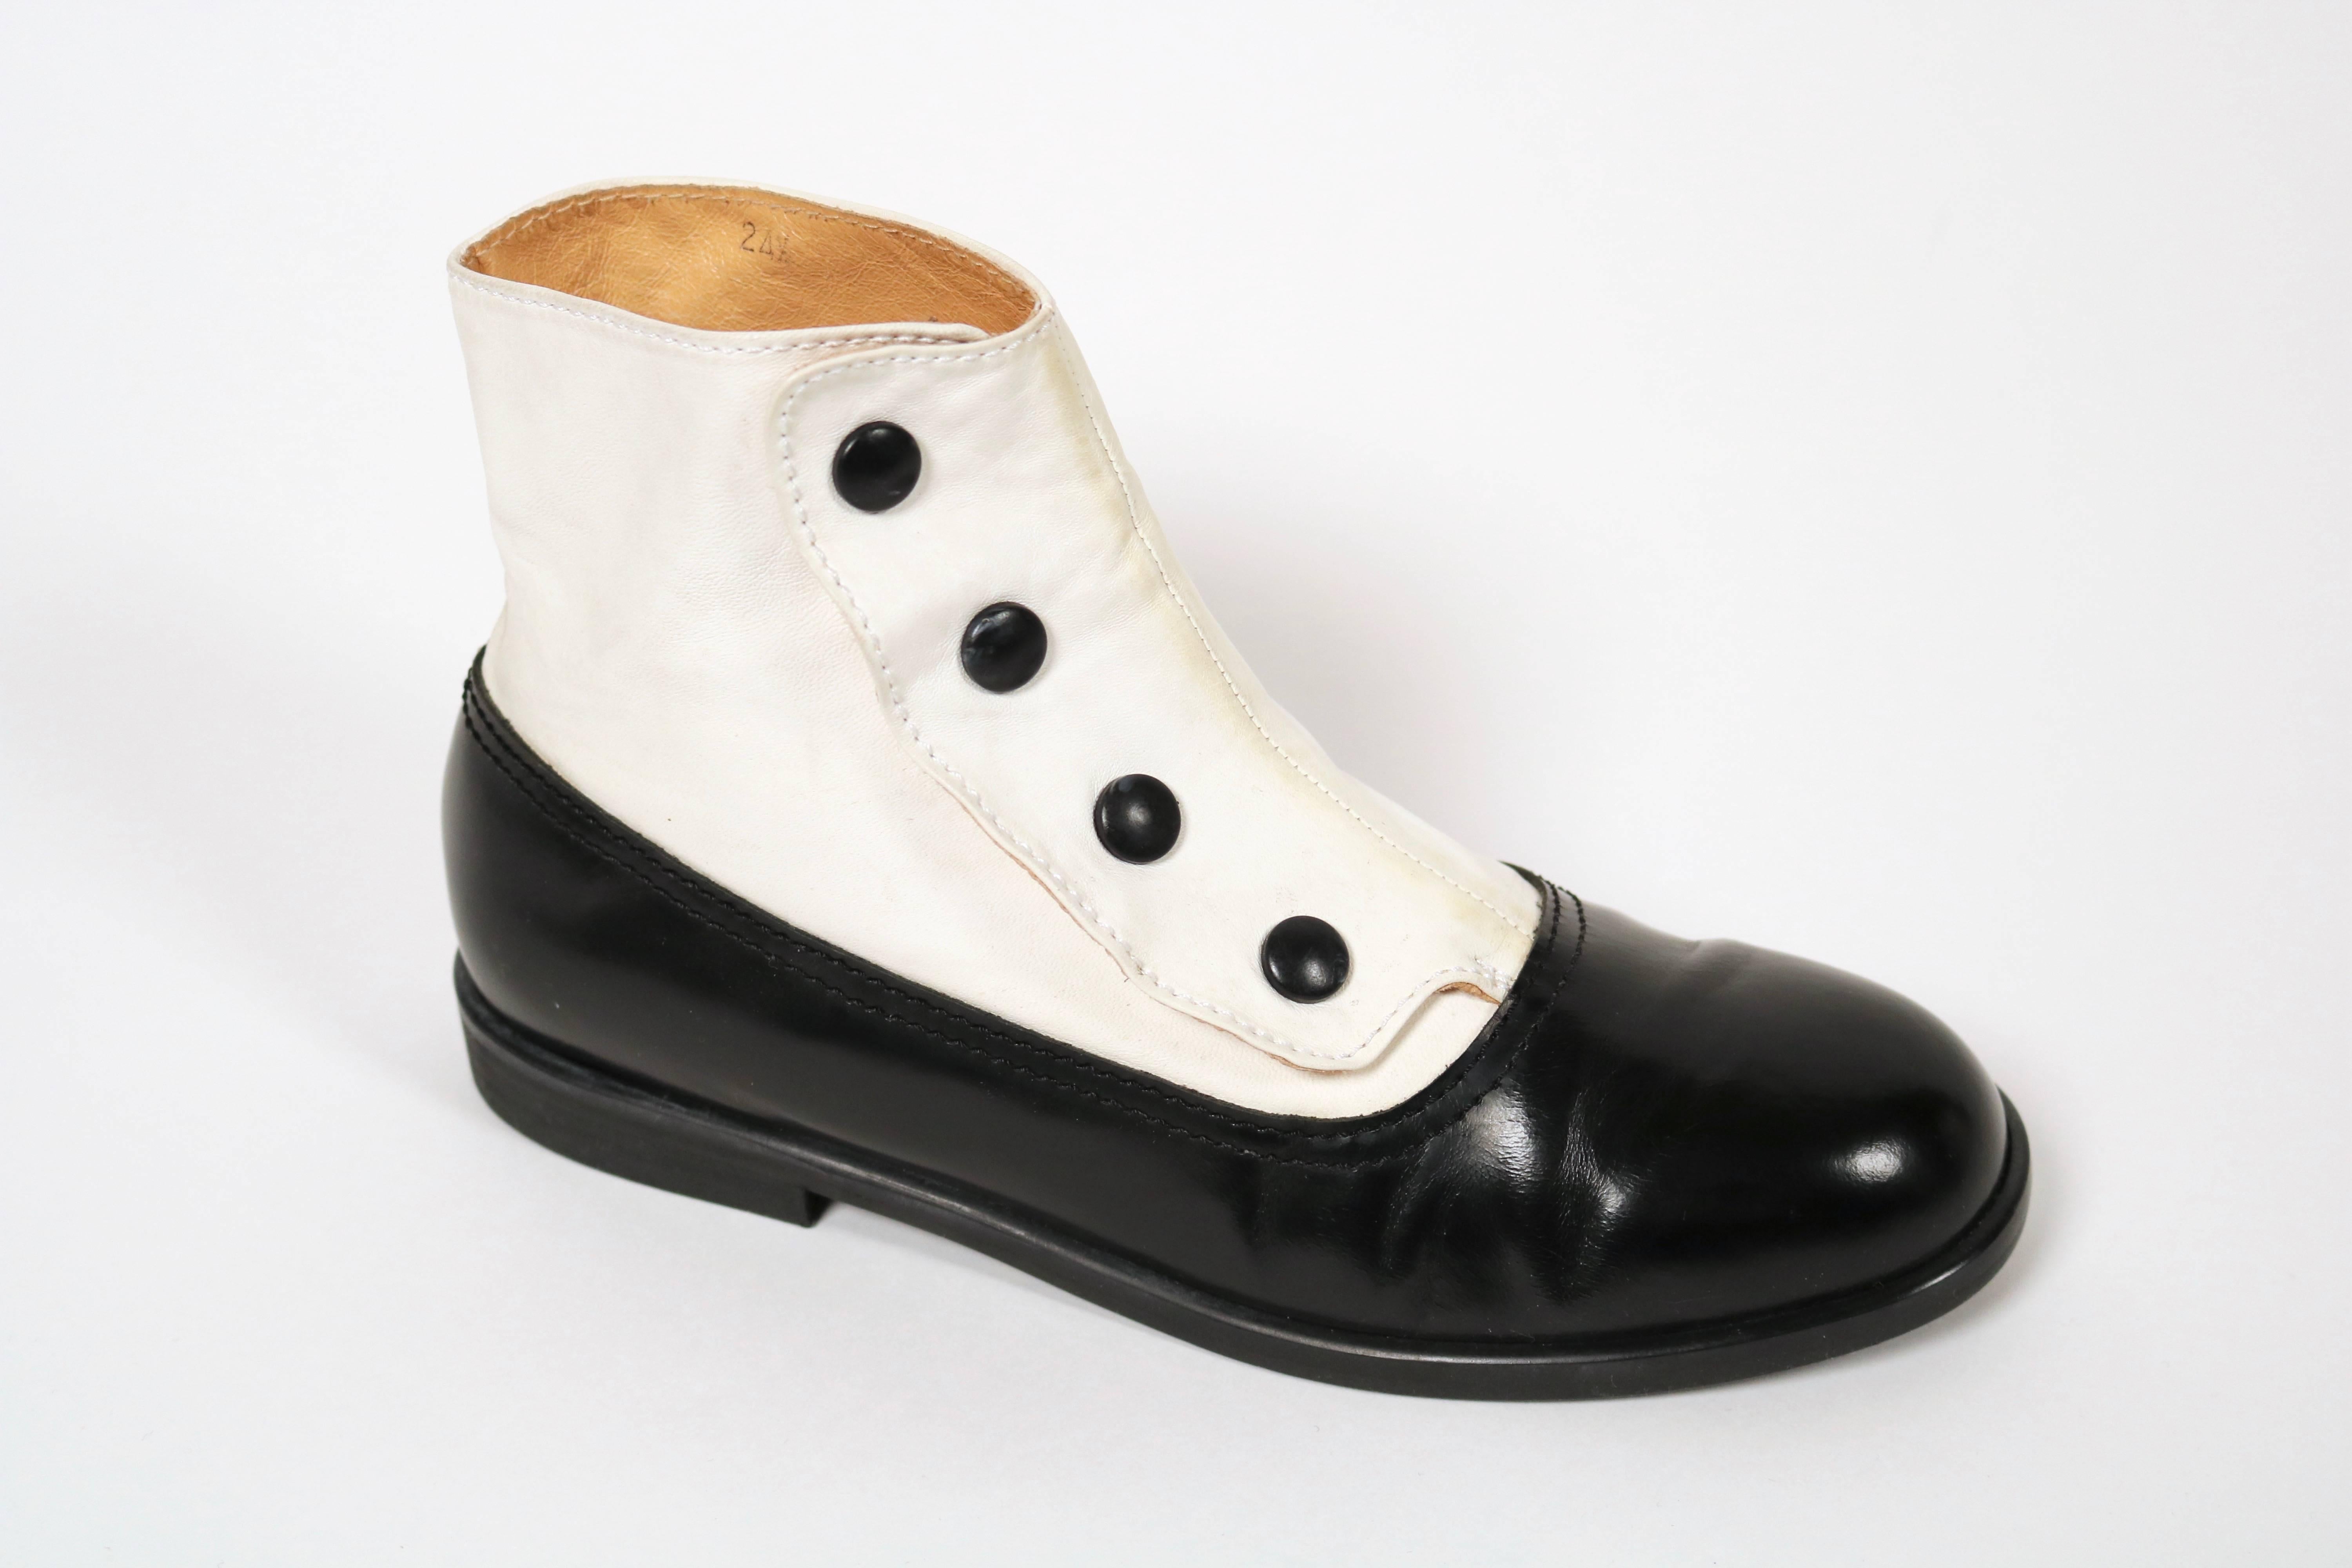 Very unusual black leather booties with attached white leather spats designed by Yohji Yamamoto dating to the 1980's. Labeled a size 'L' which best fits a US 8 or 8.5. Insoles are approximately 24.5 cm long and just over 8 cm wide. Snap closure.